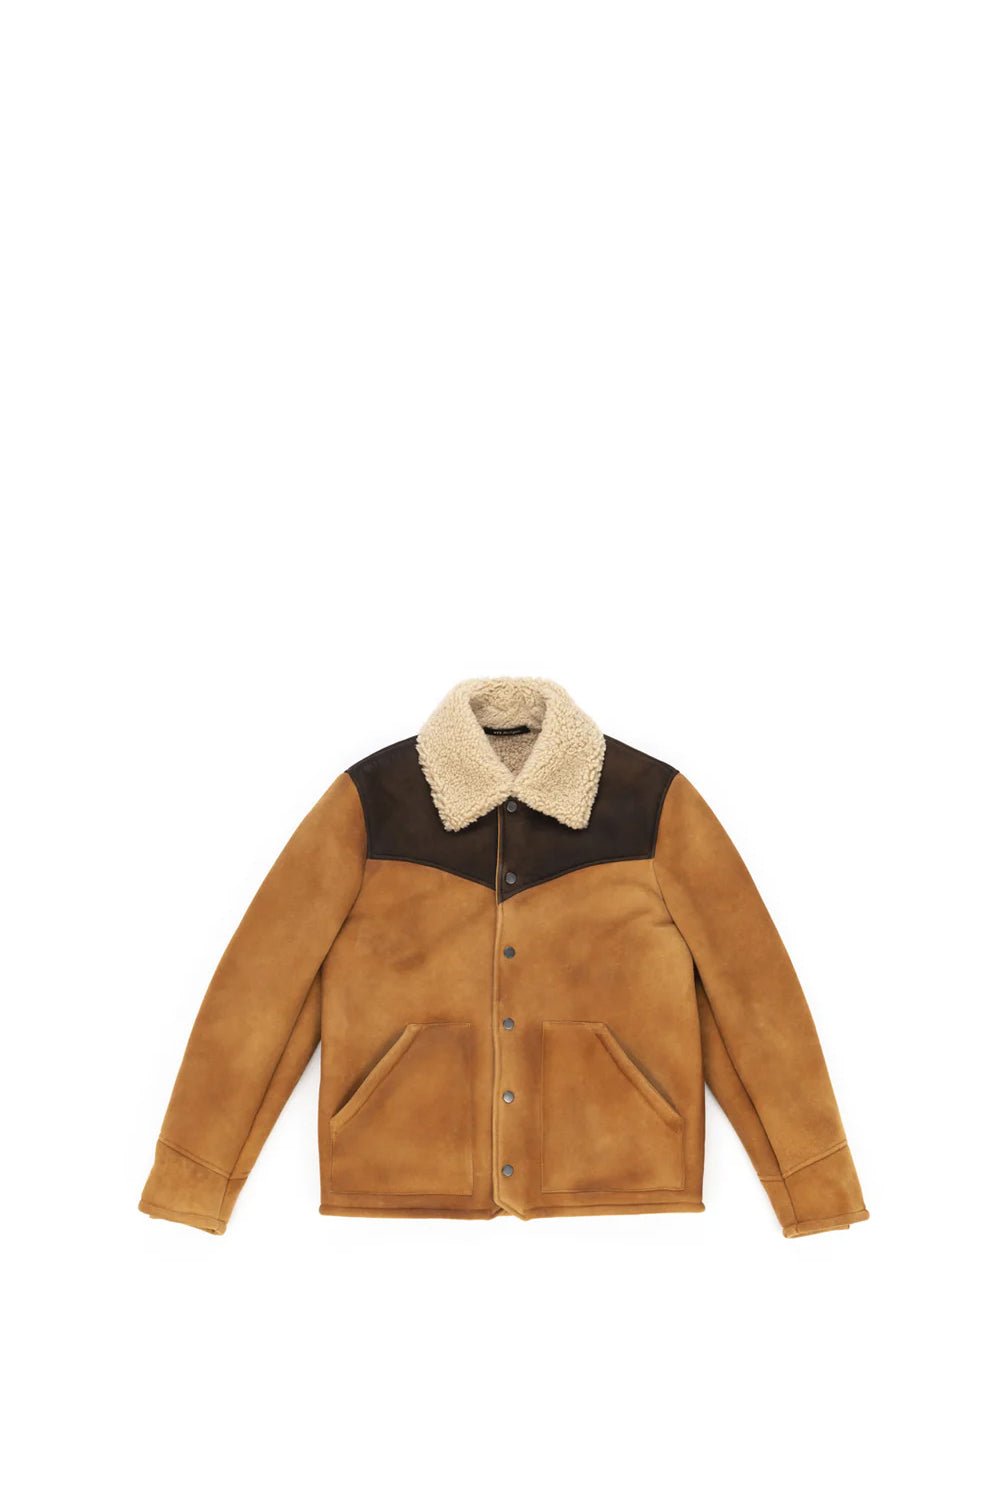 ST. ANTON JACKET Cognac leather jacket. Lining and lapels in white shearling. Frontal buttons. 2 side pockets. 100% Ovine leather. HTC LOS ANGELES